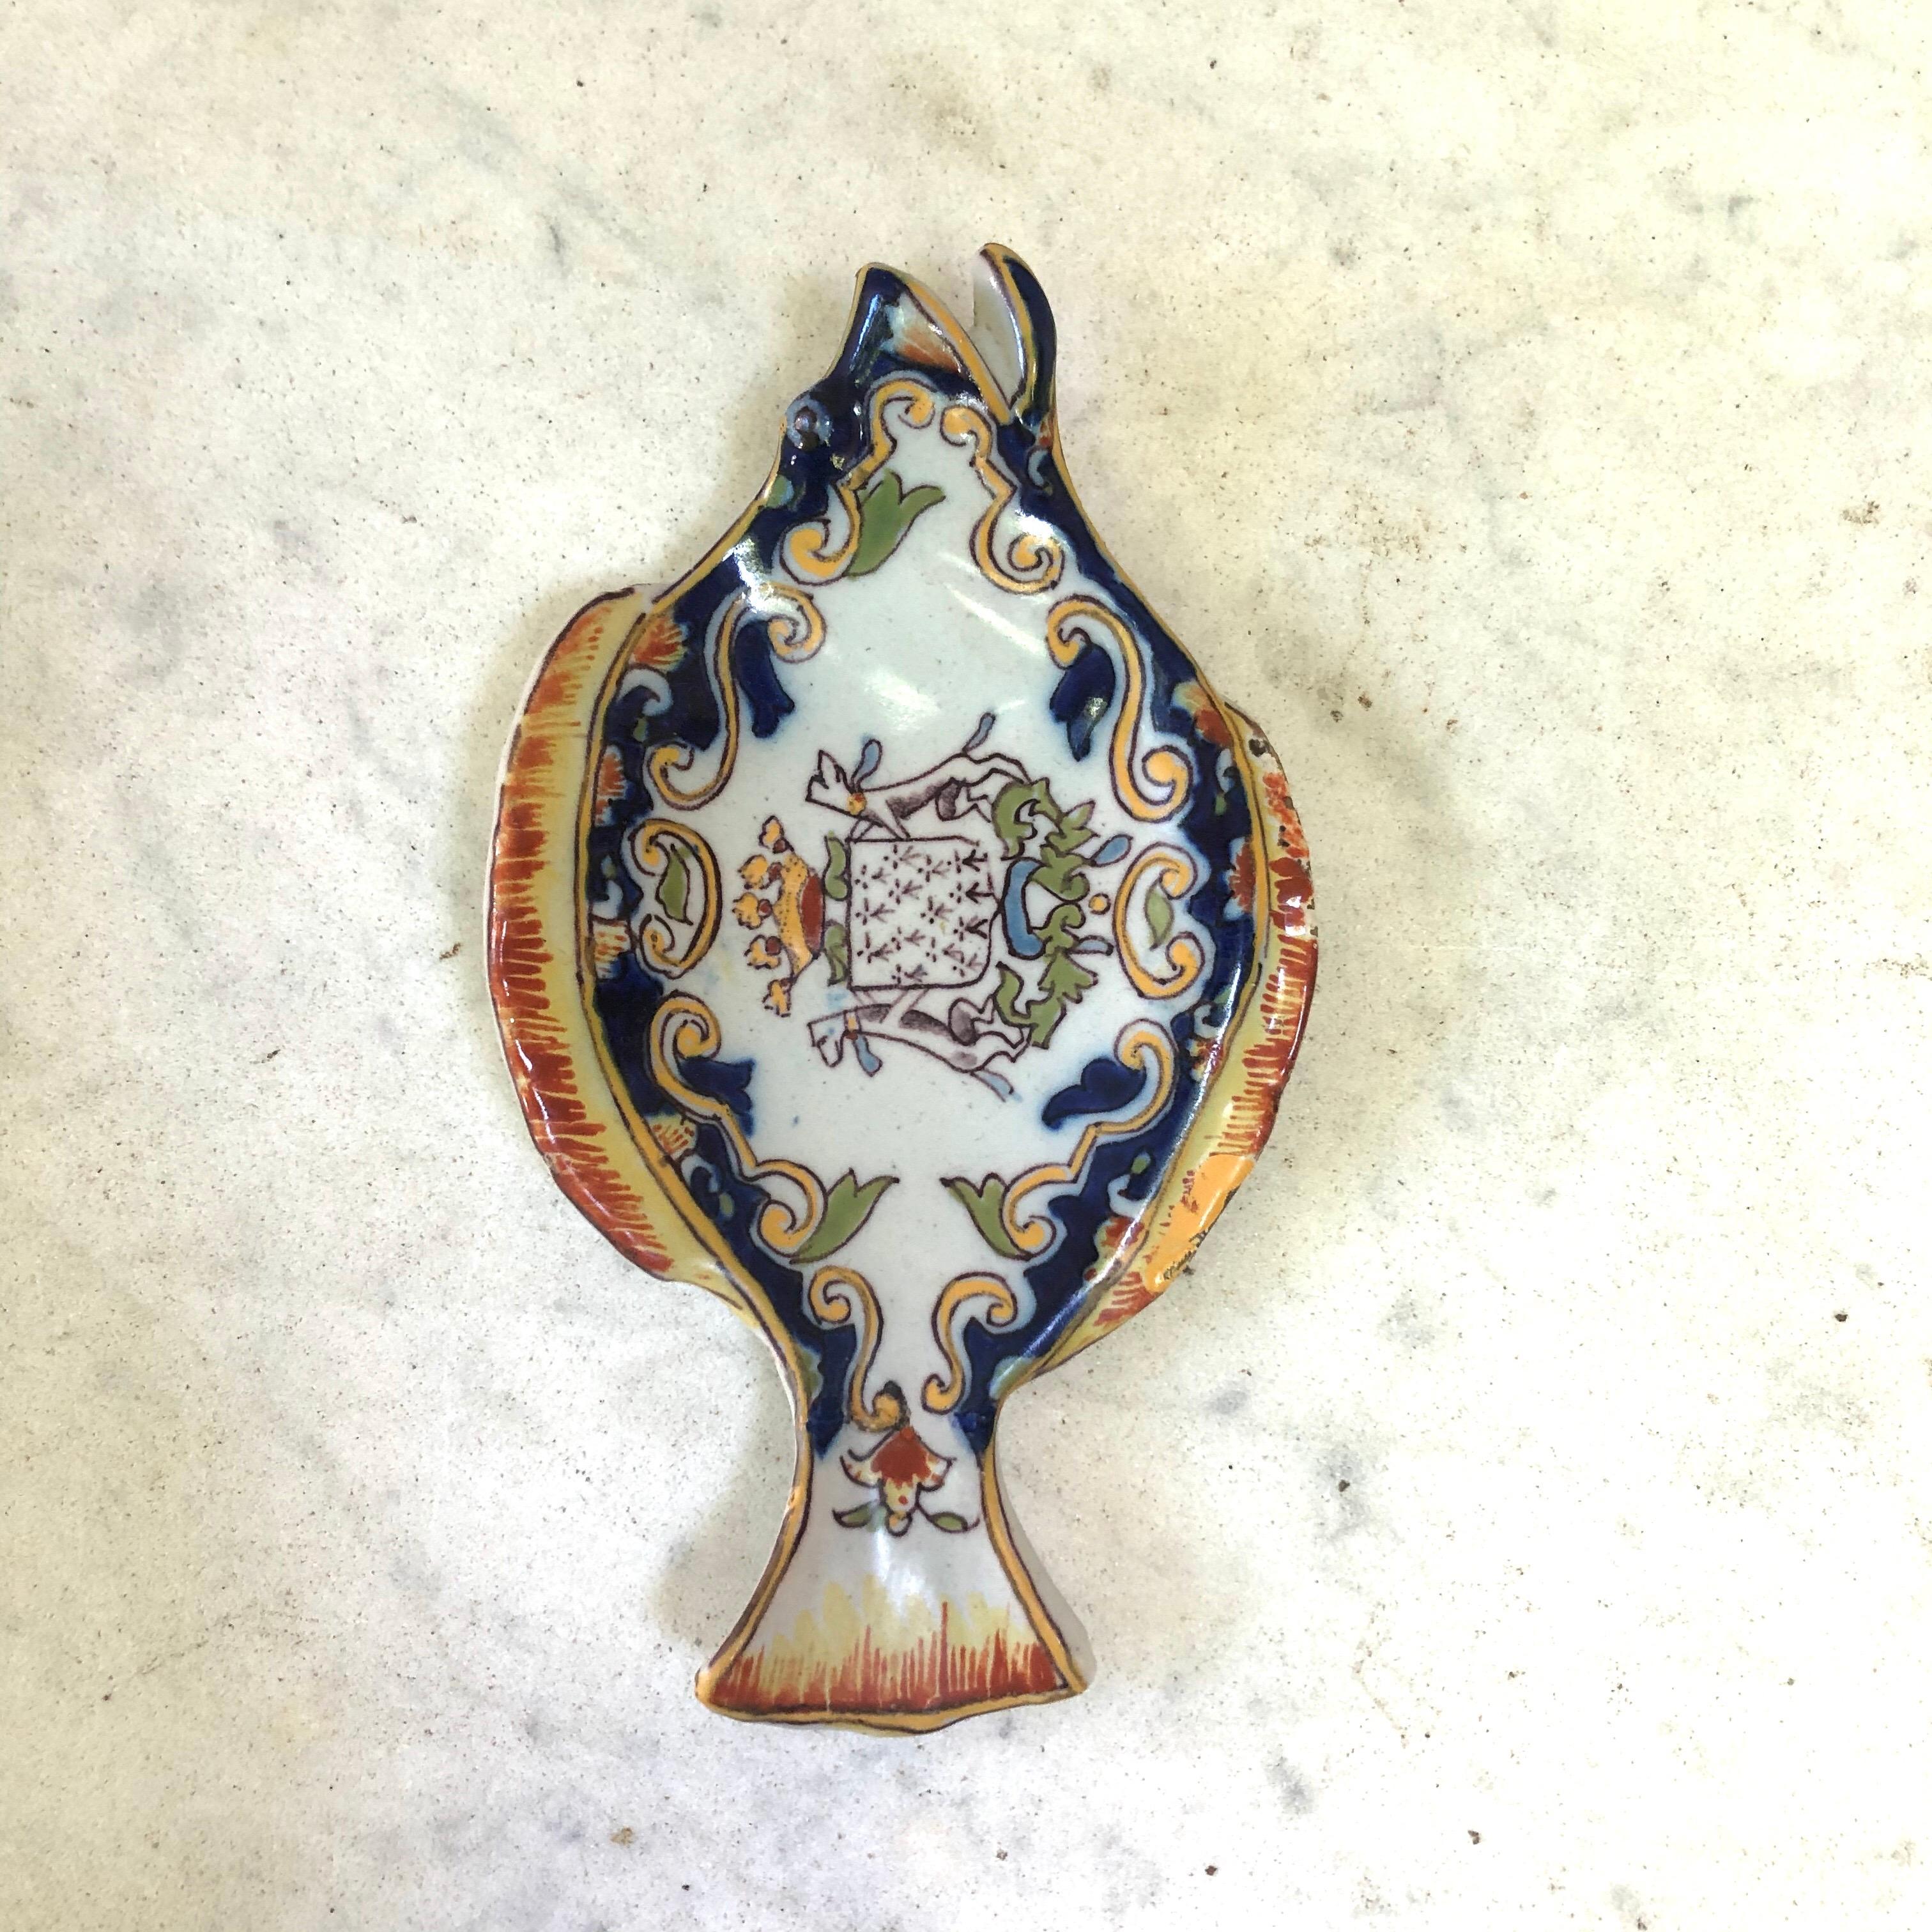 Small faience fish shape dish or platter Desvres circa 1910.
Decorated with a coat of arms.